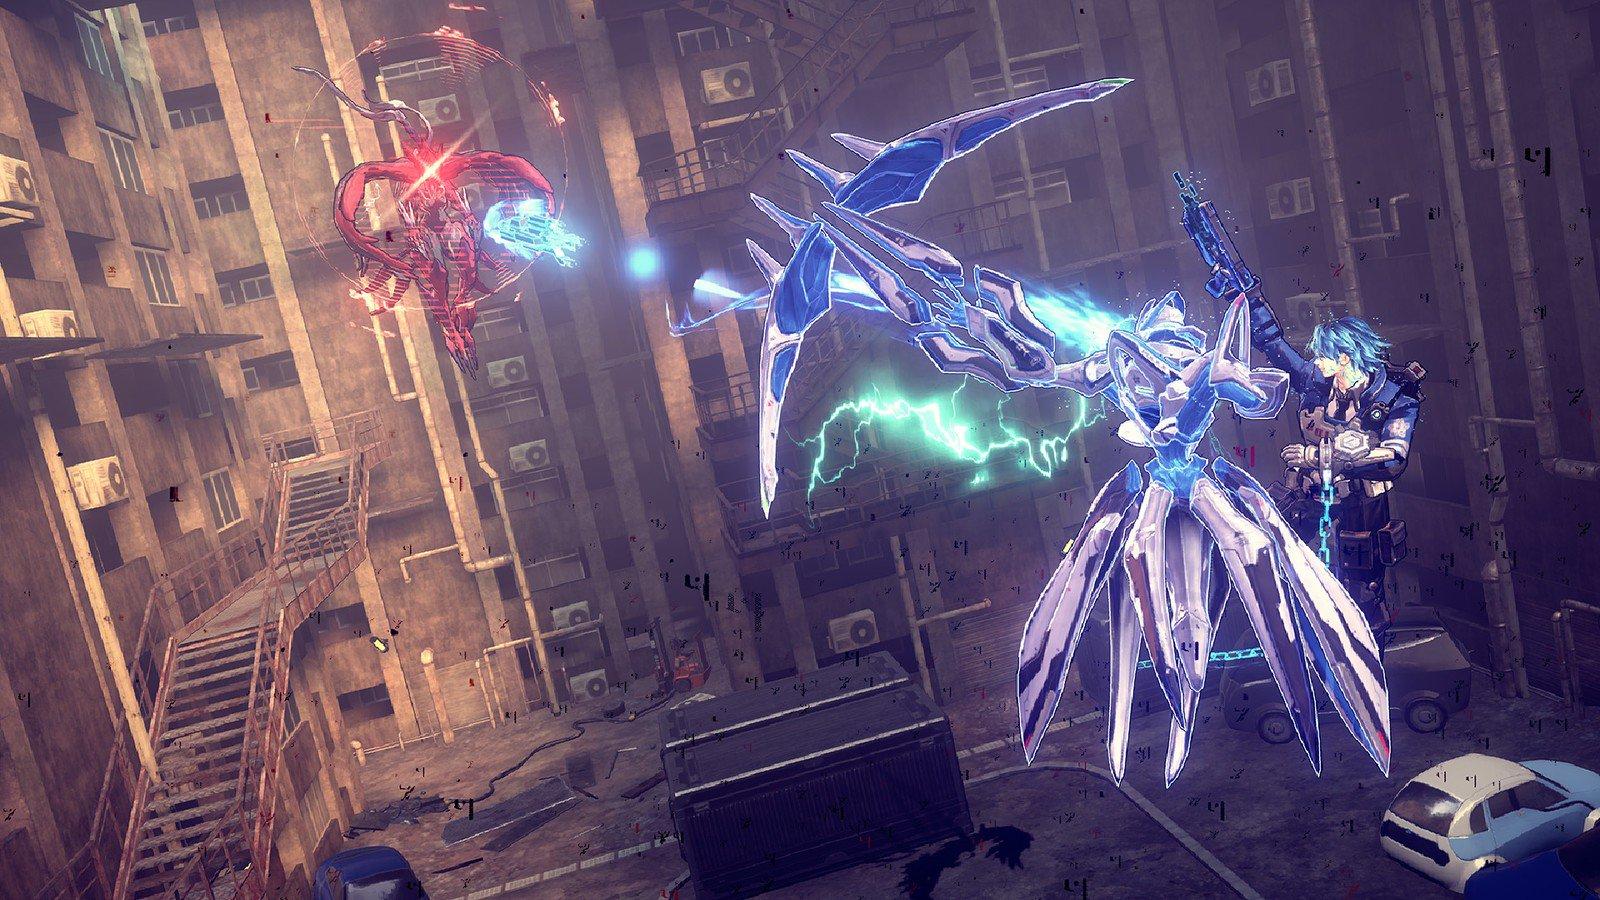 How many Legion forms are there in Astral Chain?